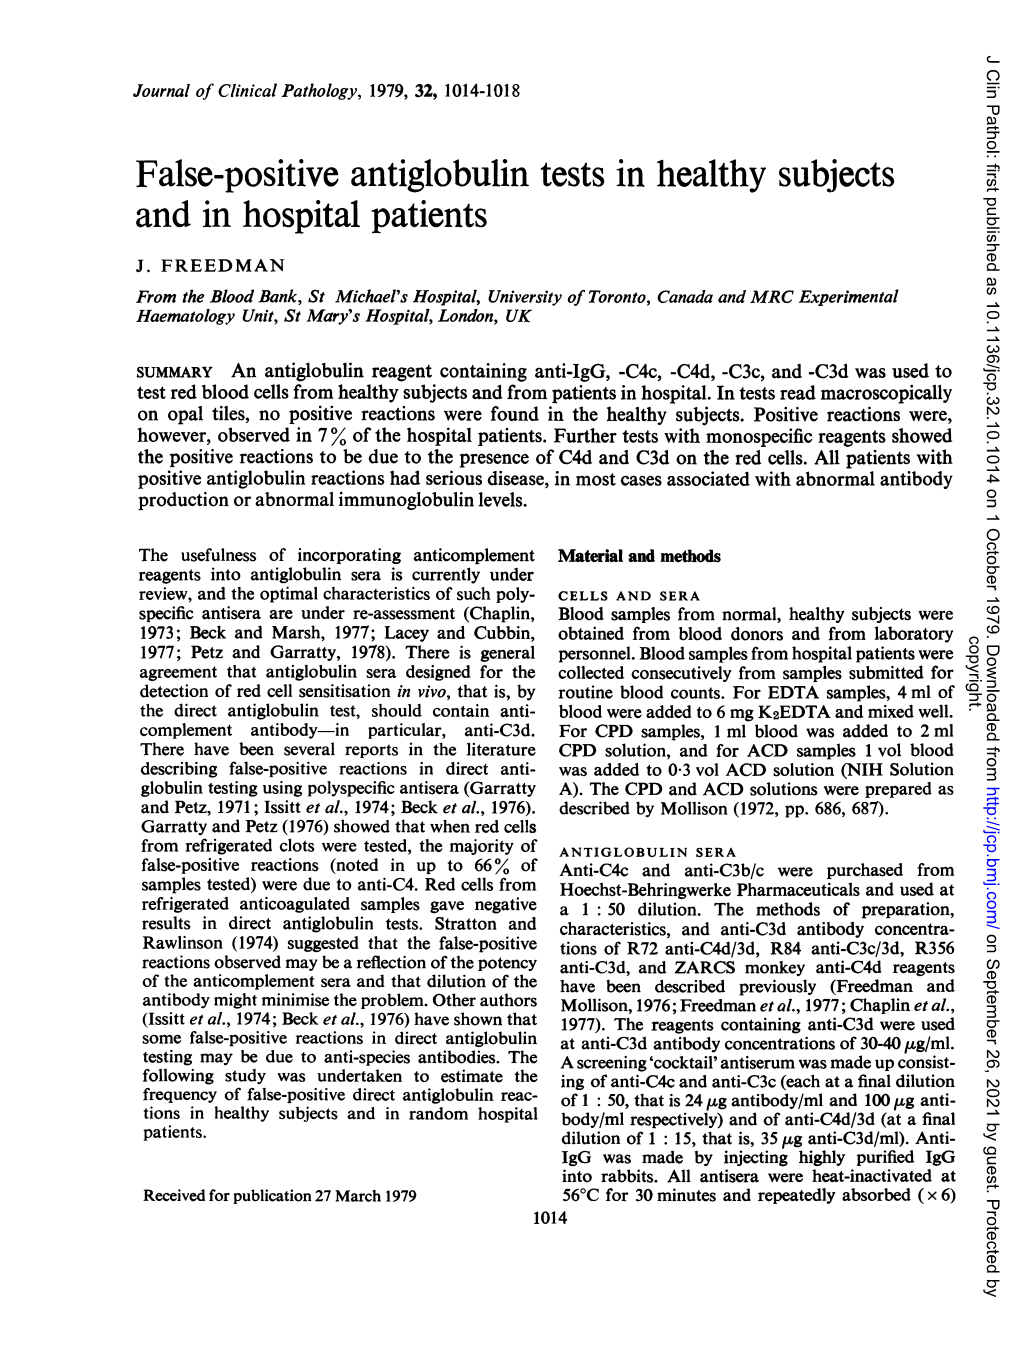 False-Positive Antiglobulin Tests in Healthy Subjects and in Hospital Patients J